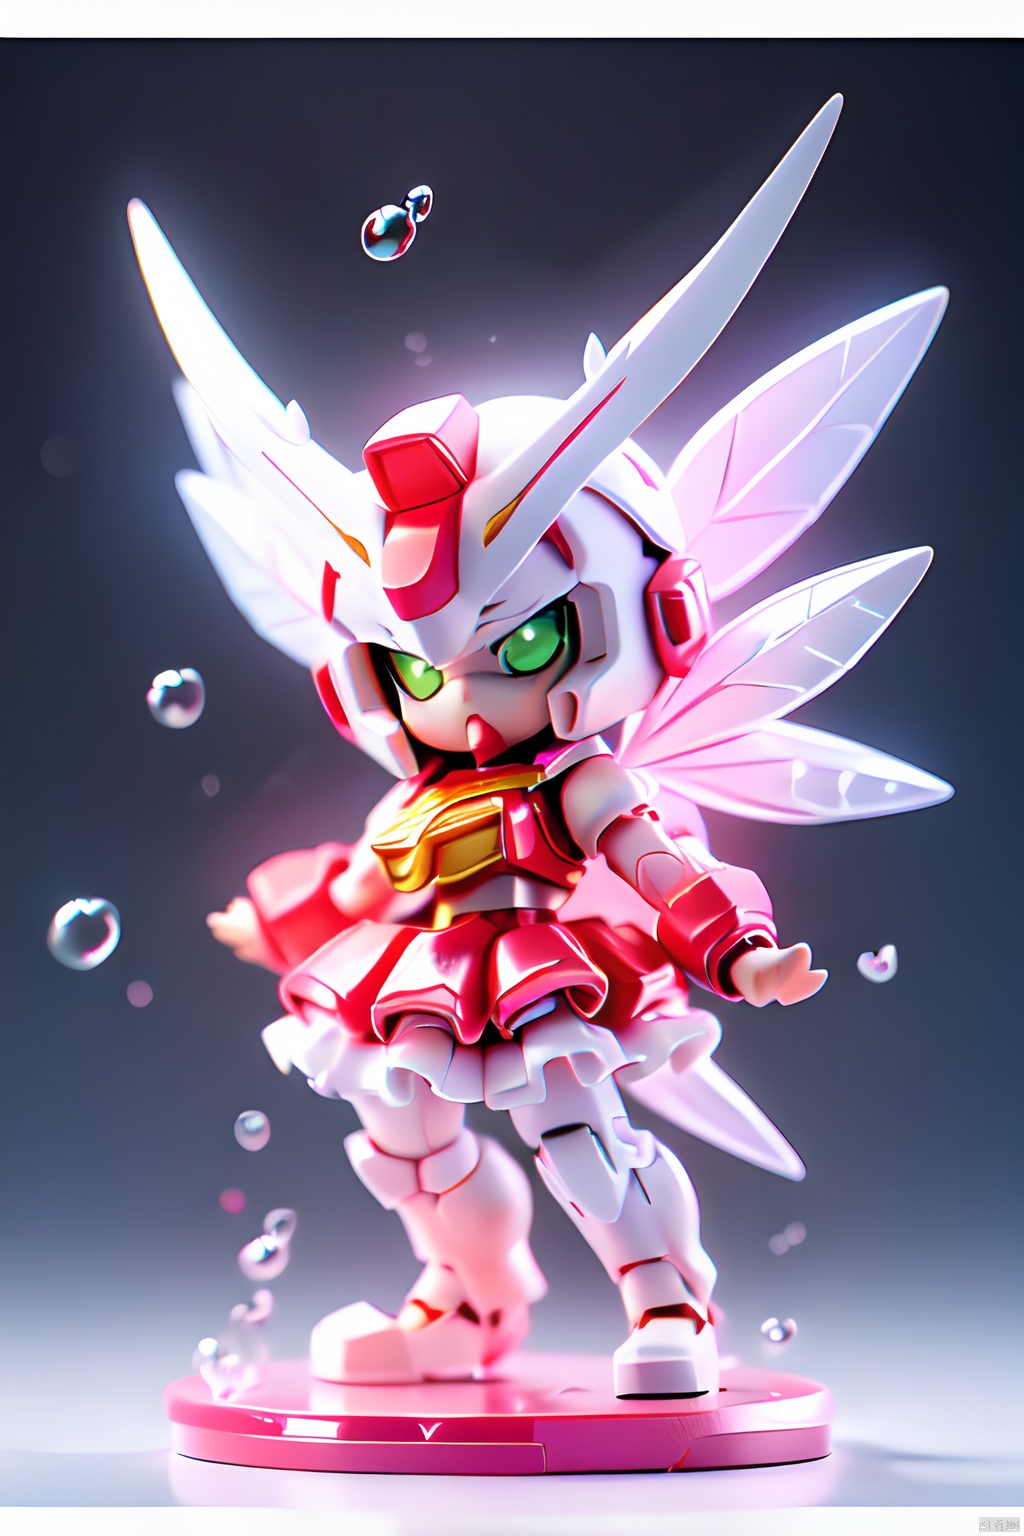 gdsj,mecha,no humans,robot,v-fin,green eyes,solo,glowing,mobile suit,glowing eyes,letterboxed,science fiction,looking at viewer,wings,clenched hands,bubble,(Full body photo),1 Transparent cute fairy,Fantasy glow,clean,white background,(Raytracing, HDR, Reasonable design, High detail, Masterpiece, Best quality, Ultra HD),light pink skirt,dull polish,3D render,